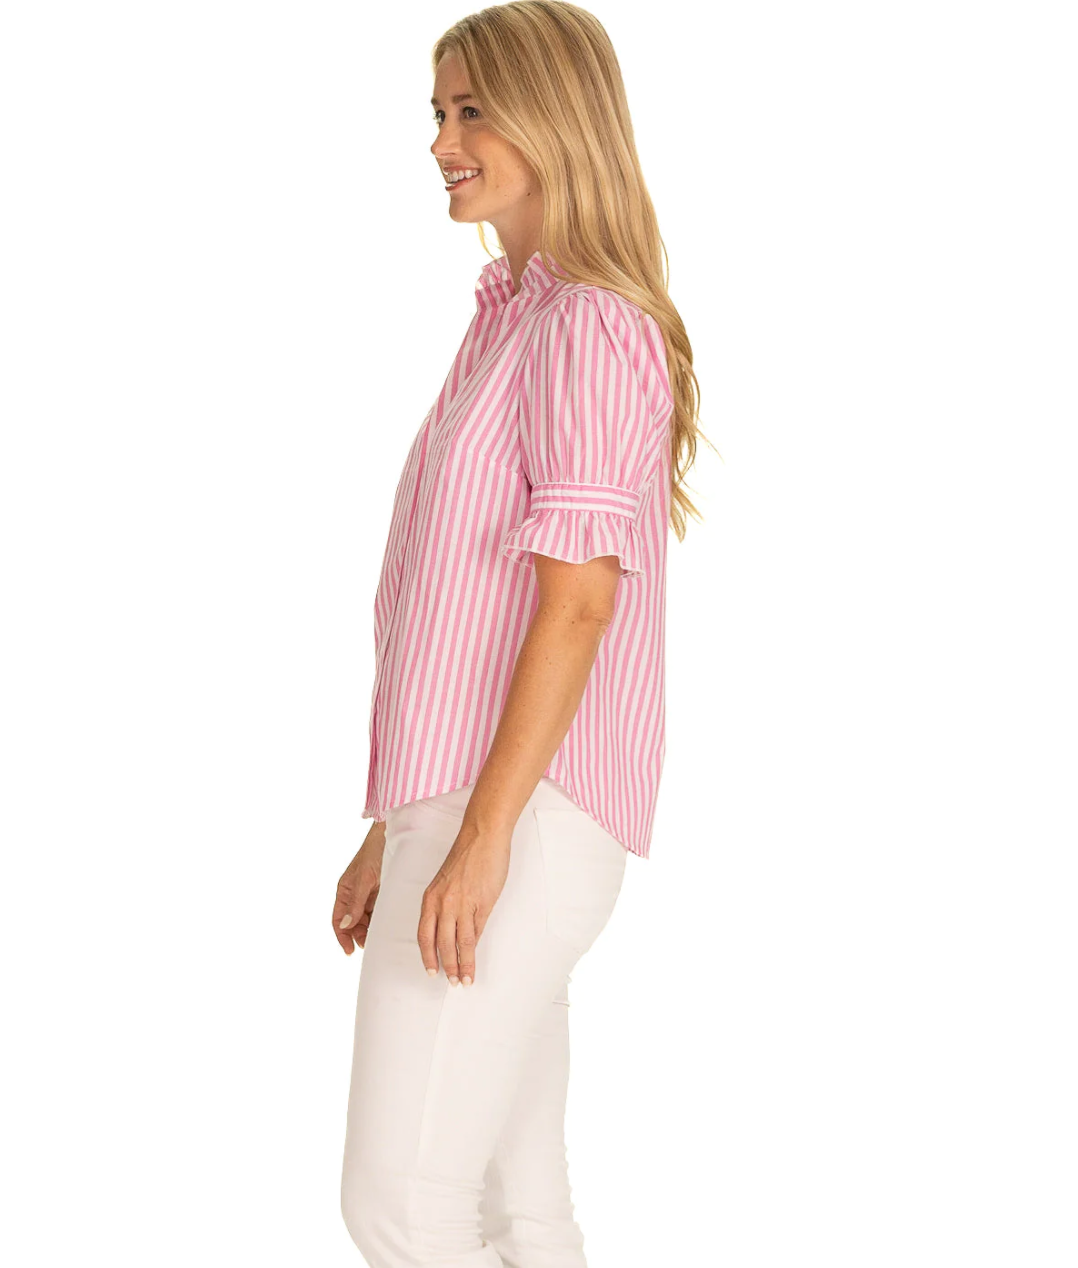 The Marlow Top - Pink Orchid Stripe